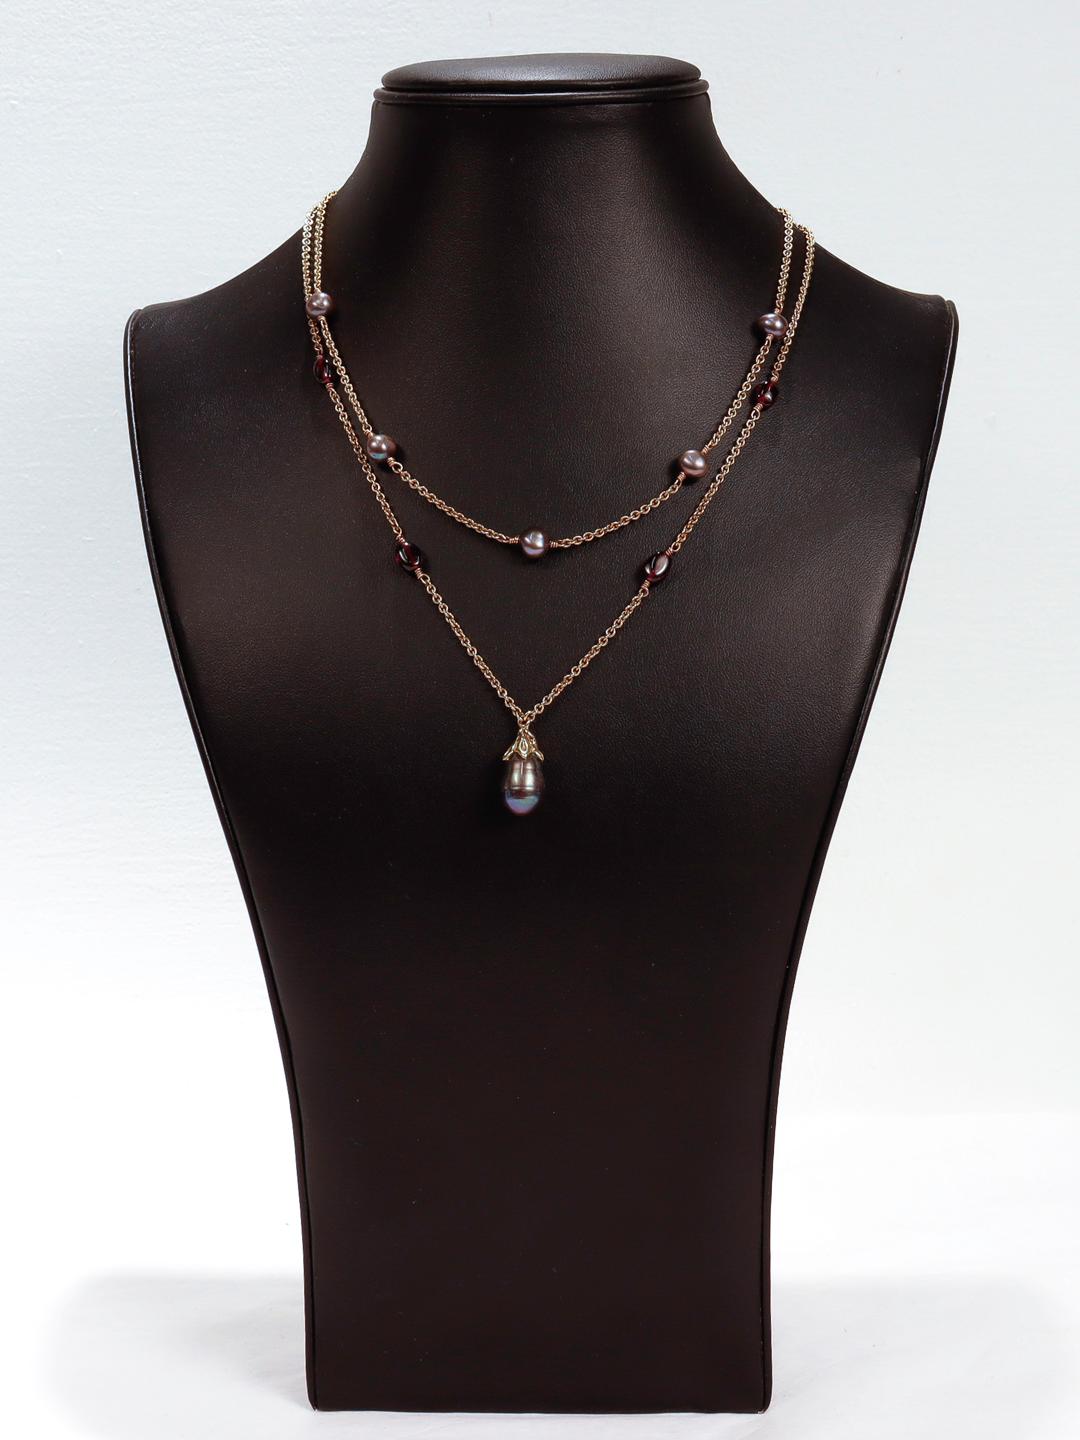 Women's Lazaro Diaz Layered Double Chain 18k Gold, Amethyst, & Tahitian Pearl Necklace For Sale